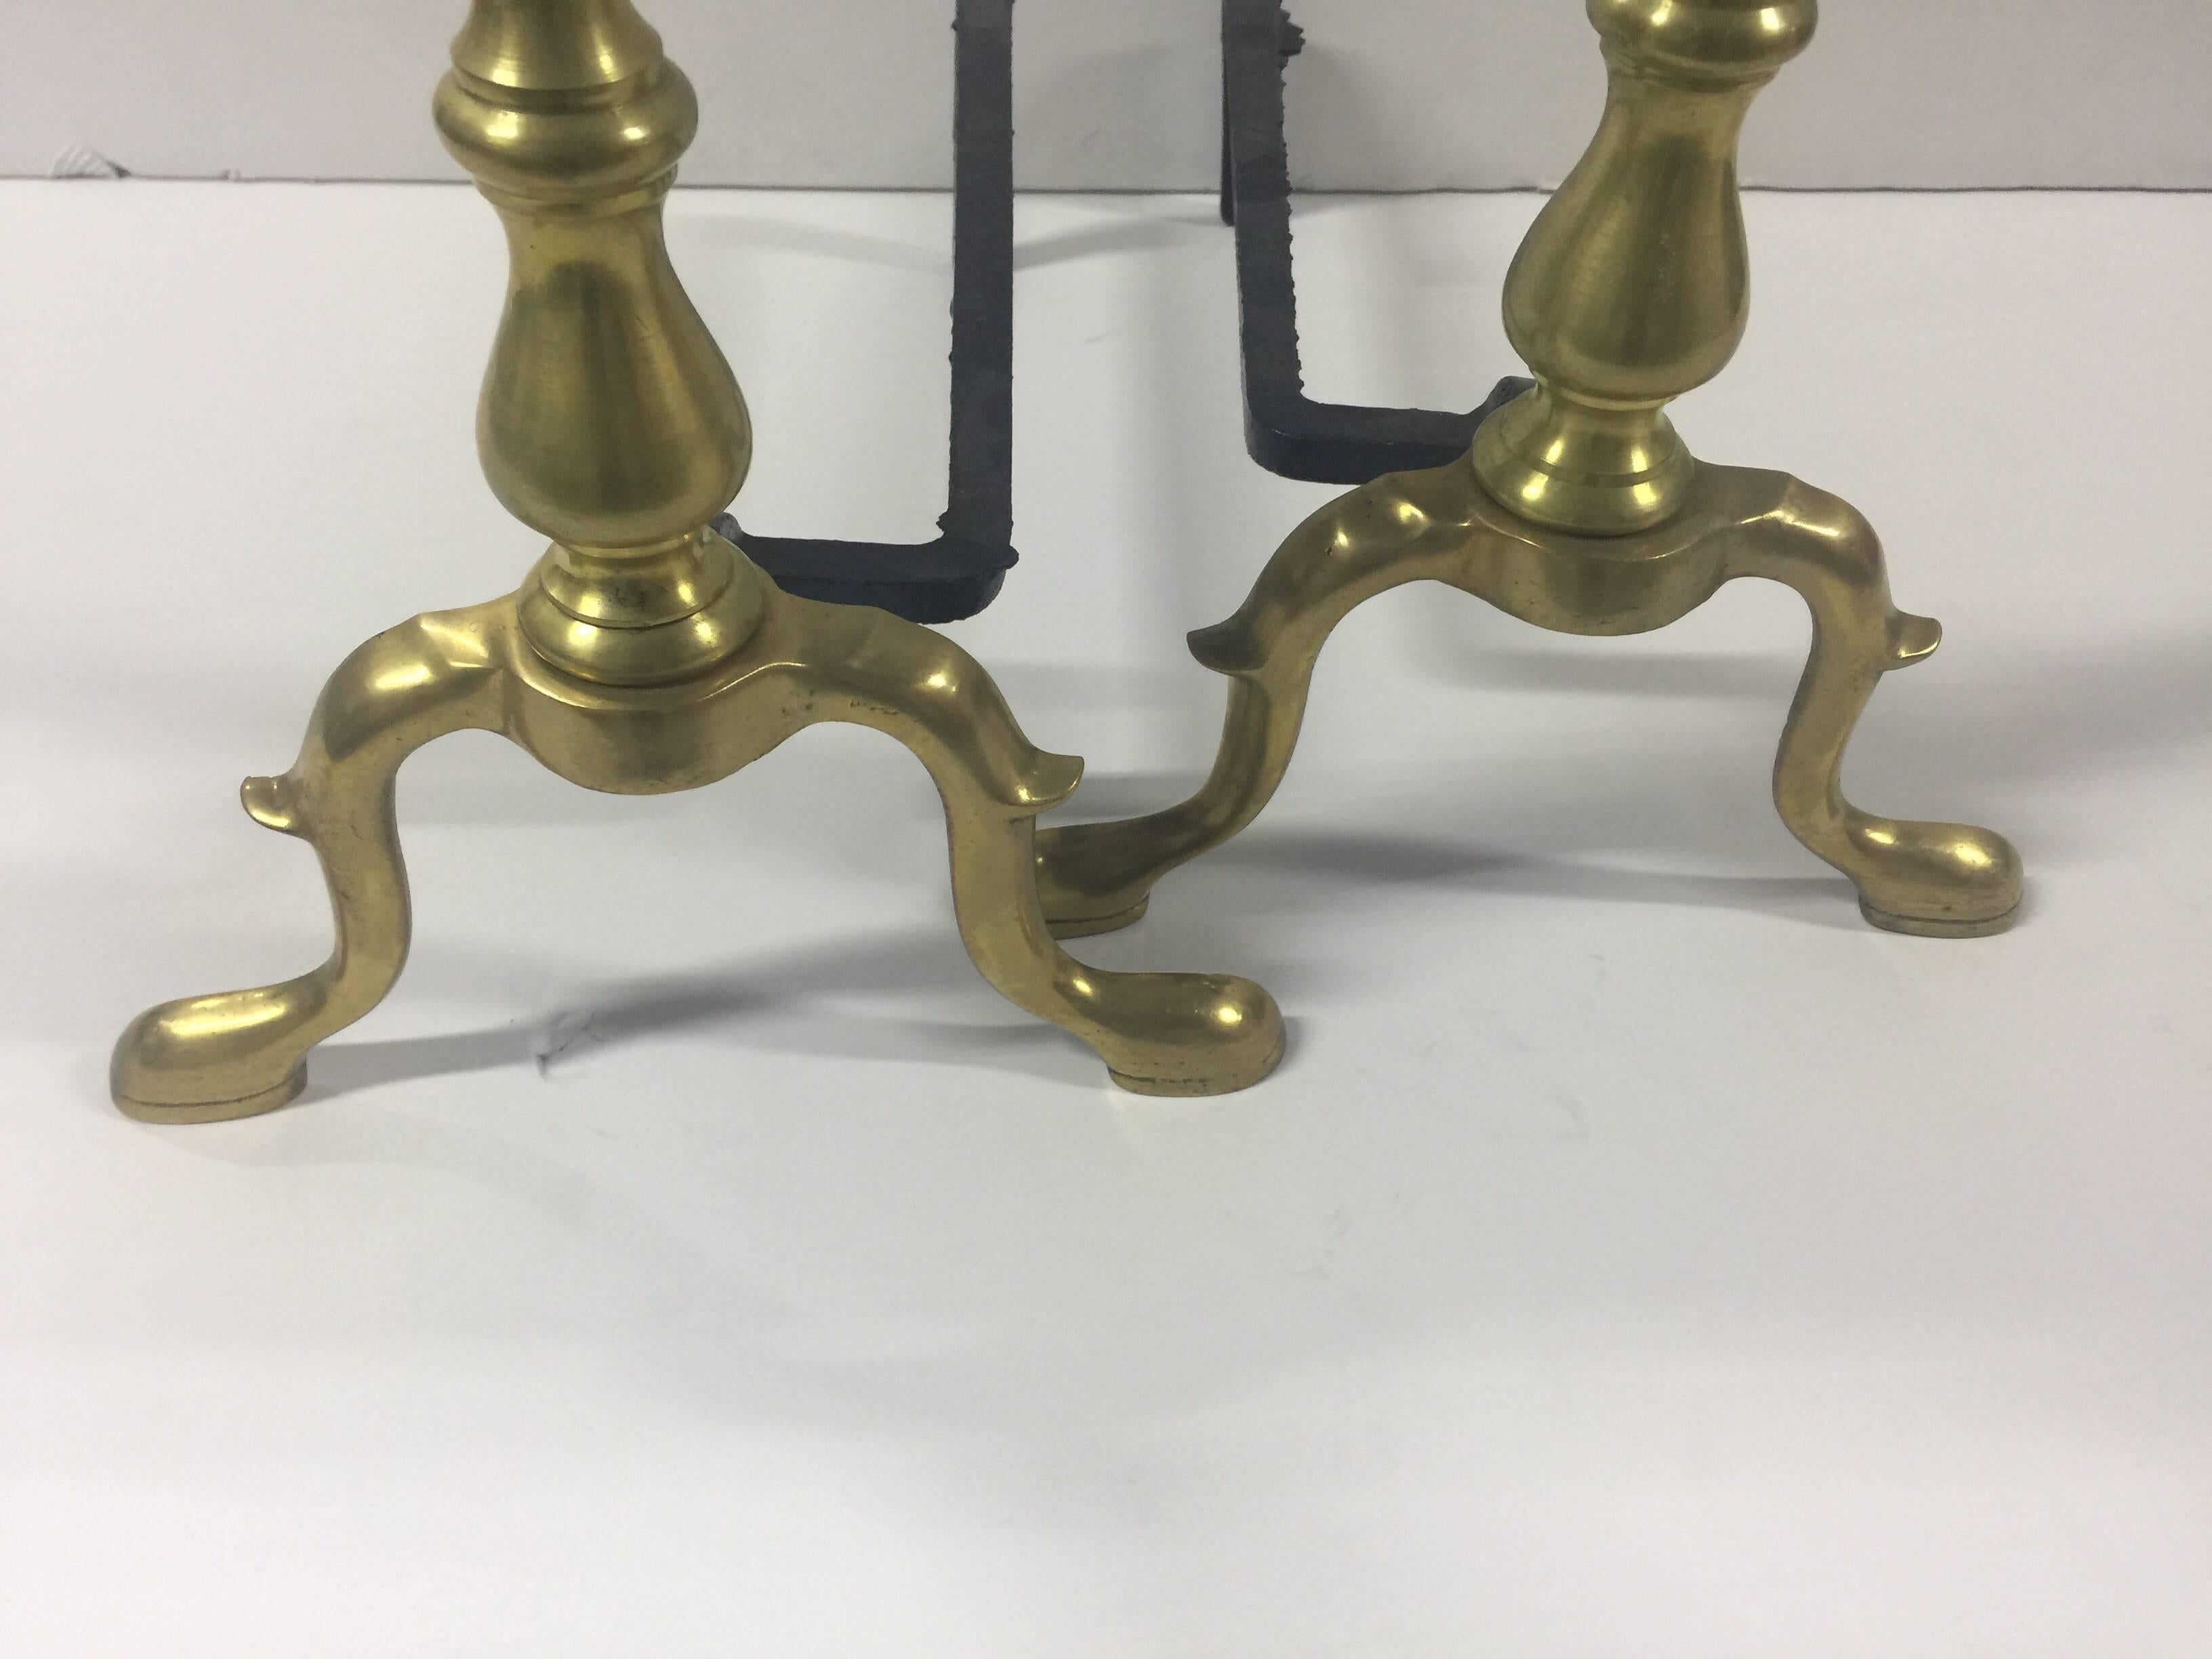 American Vintage 1940s Traditional Polished Brass Andirons